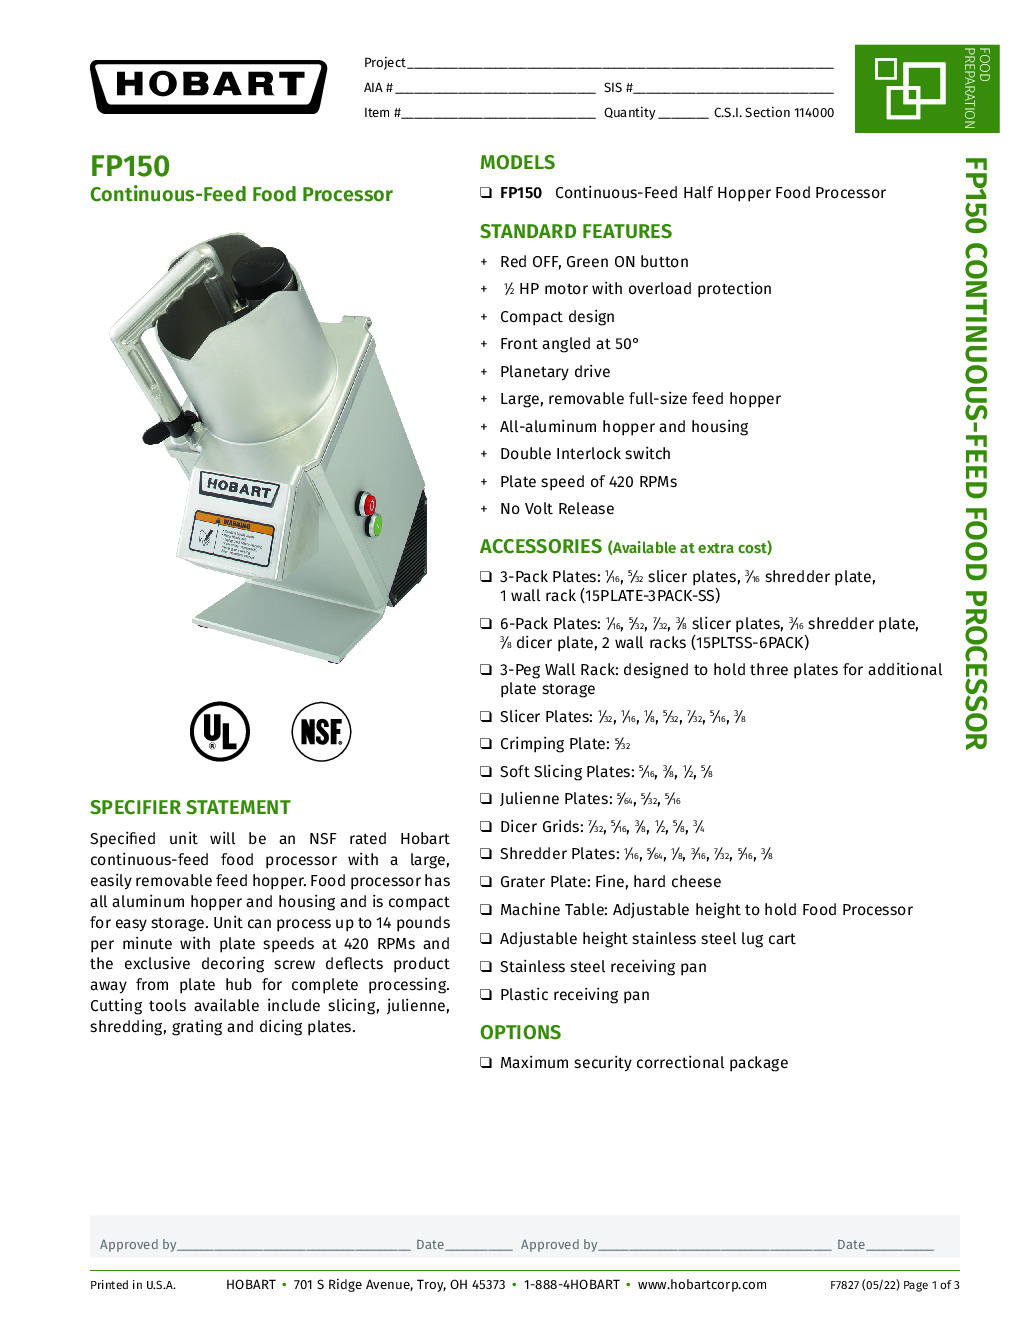 Hobart FP150-2  Benchtop Continuous Feed Food Processor, Unit Only, Full Size Hopper,14 Ib Per Minute, 1/2 hp 220-230v/50/60/1-ph